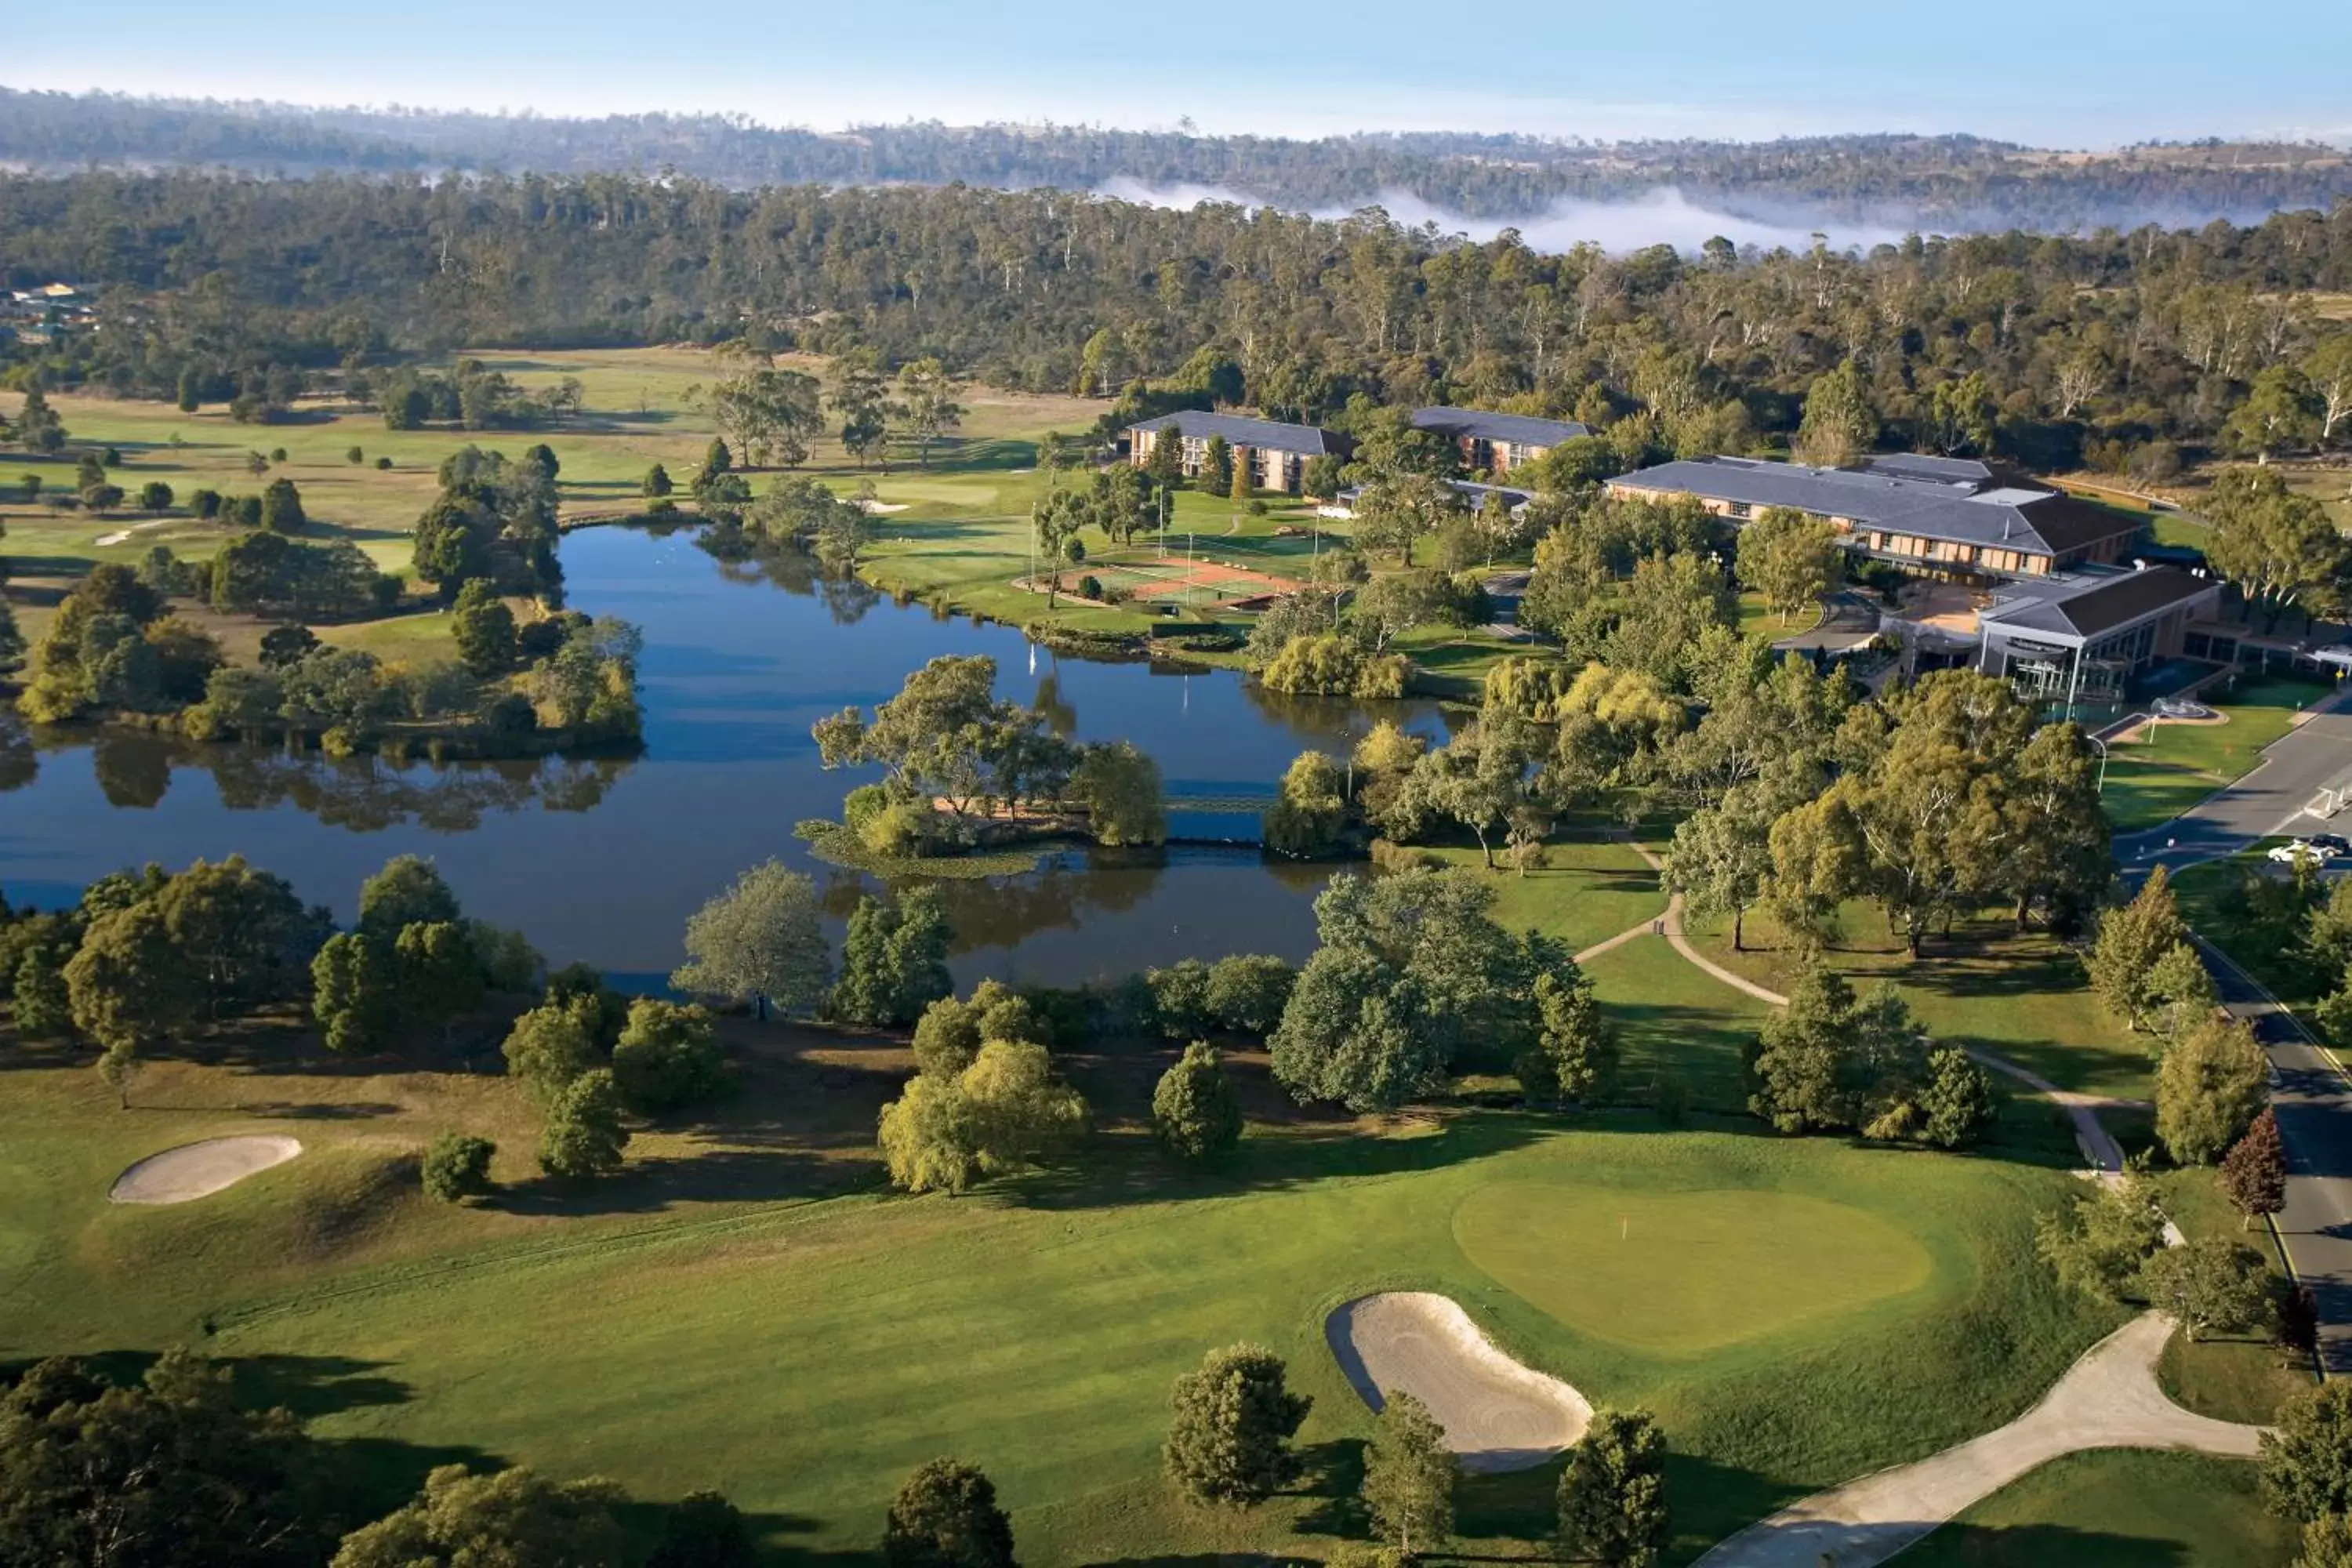 Area and facilities, Bird's-eye View in Country Club Tasmania